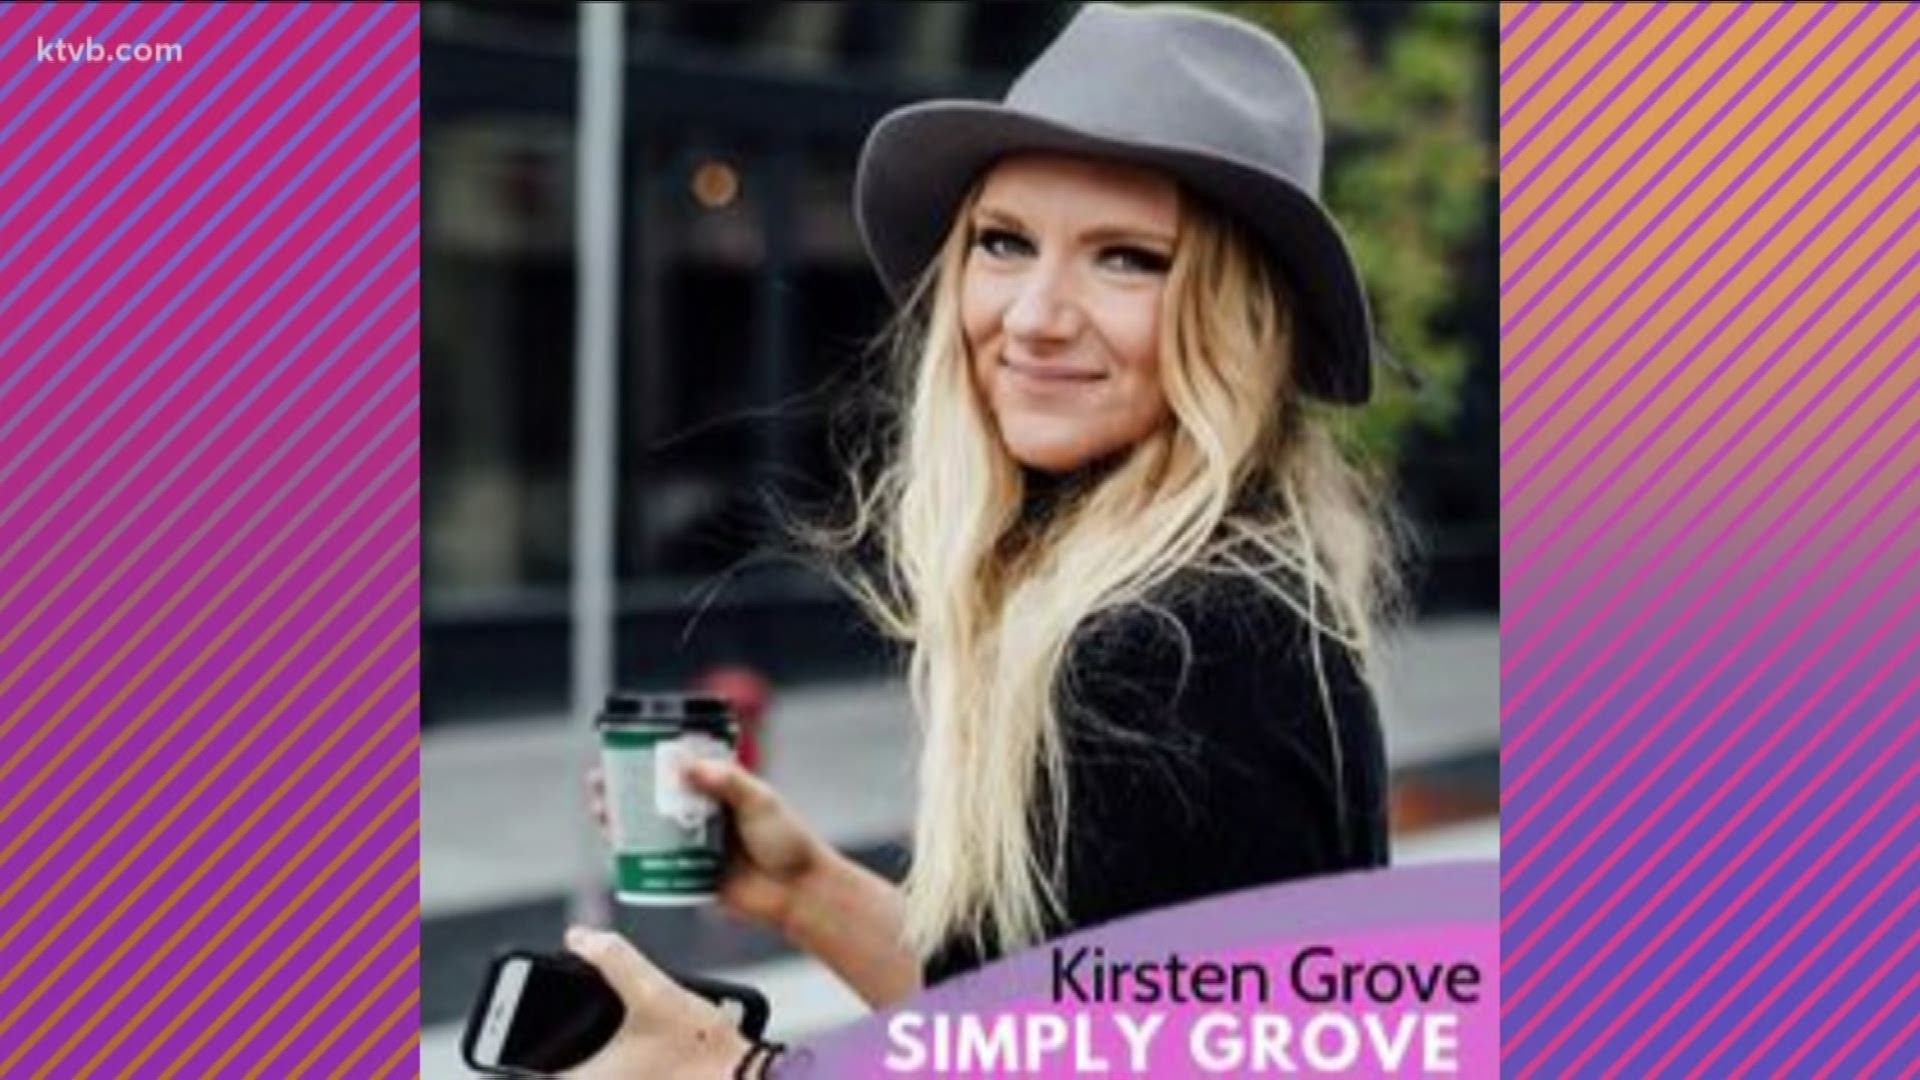 Kirsten Grove, the face of Simply Grove, has over 80,000 followers on Instagram.